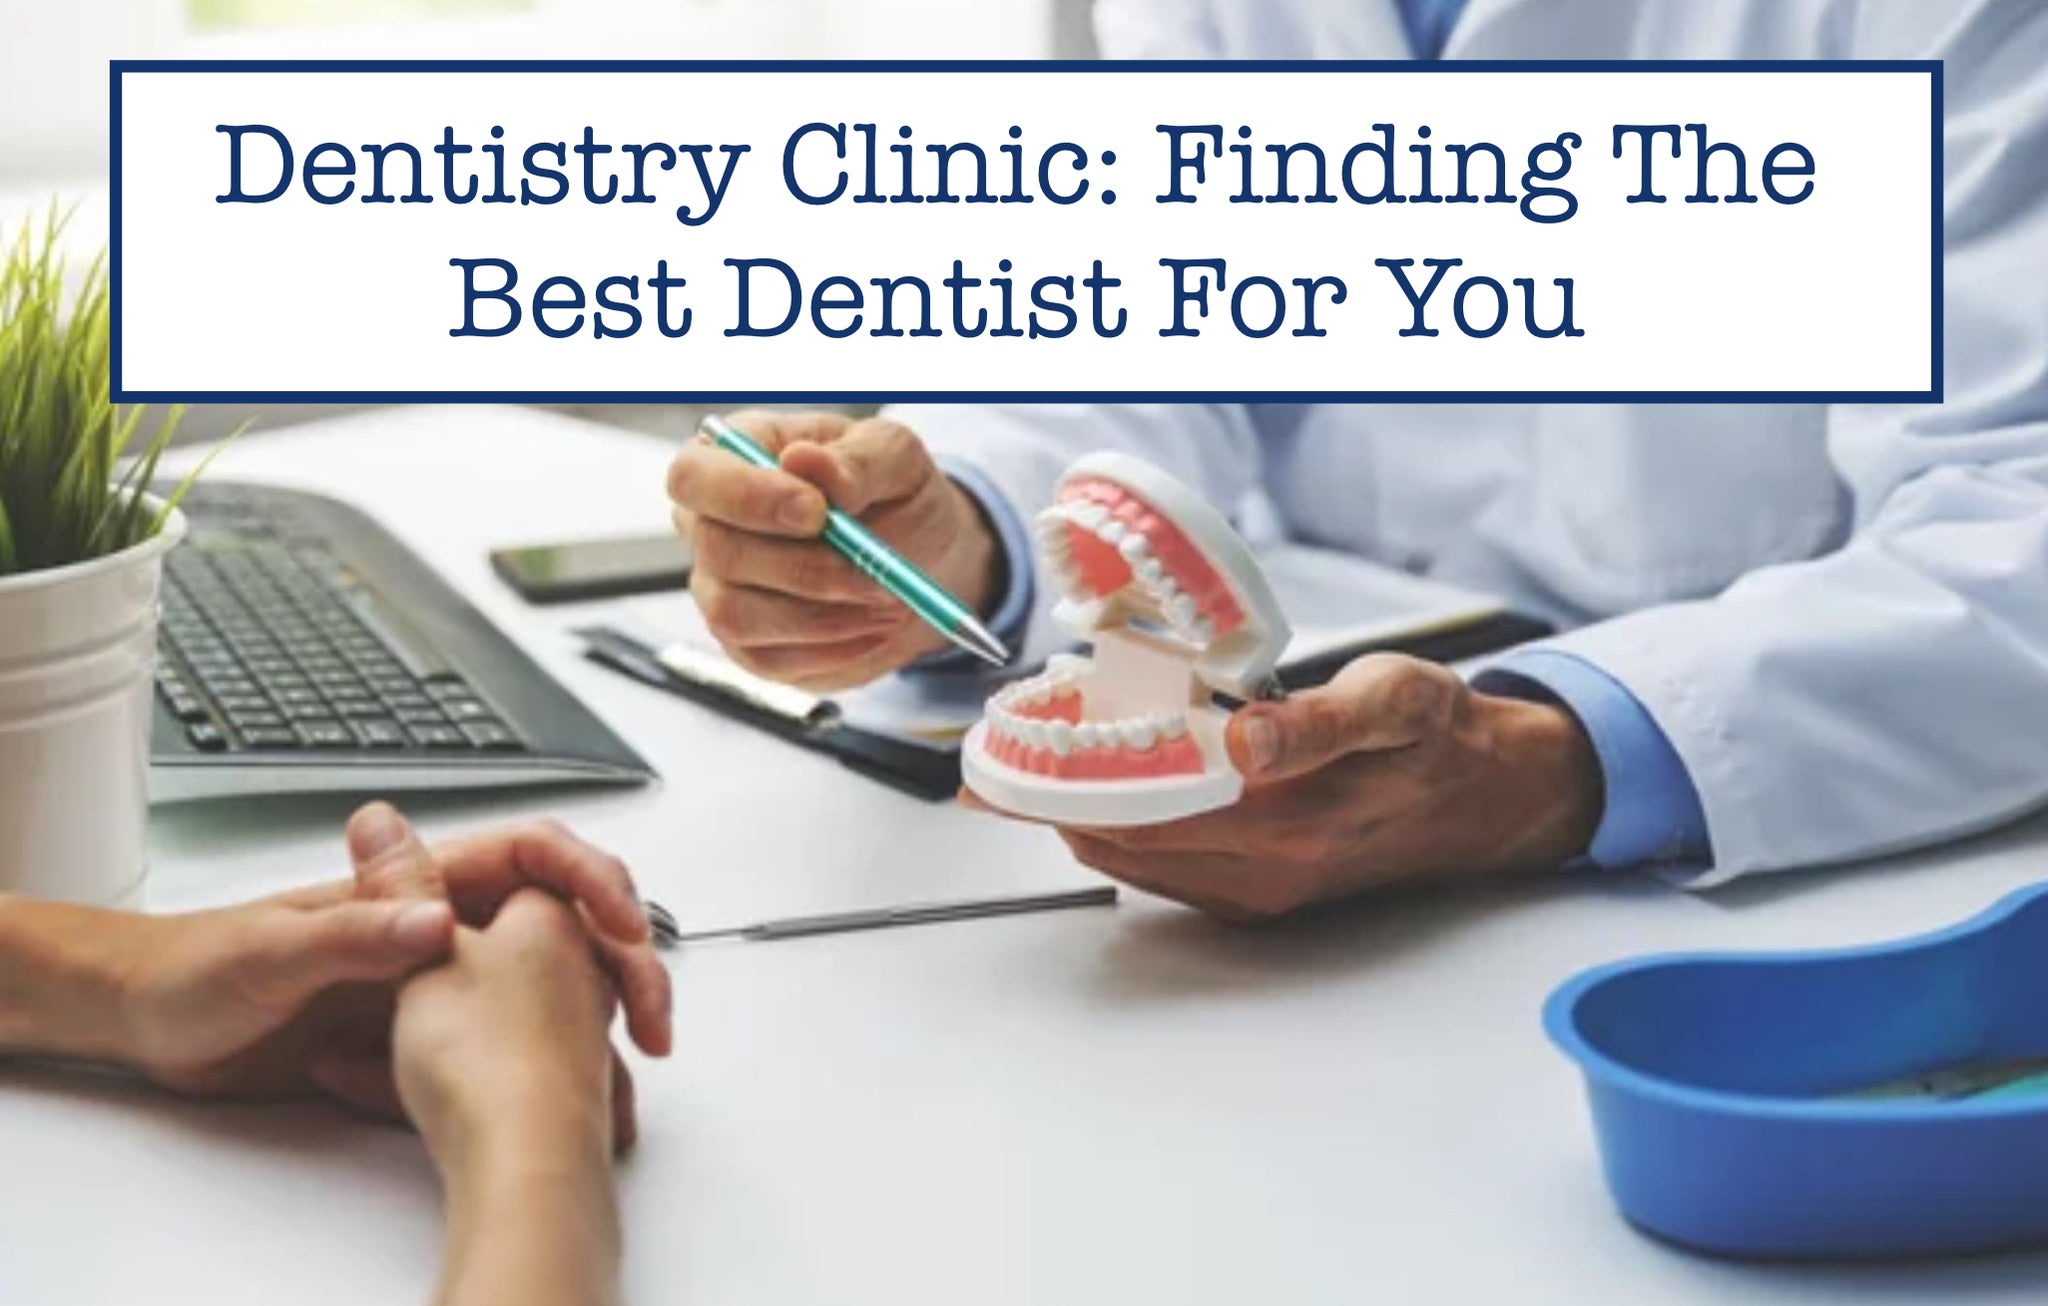 Dentistry Clinic: Finding The Best Dentist For You